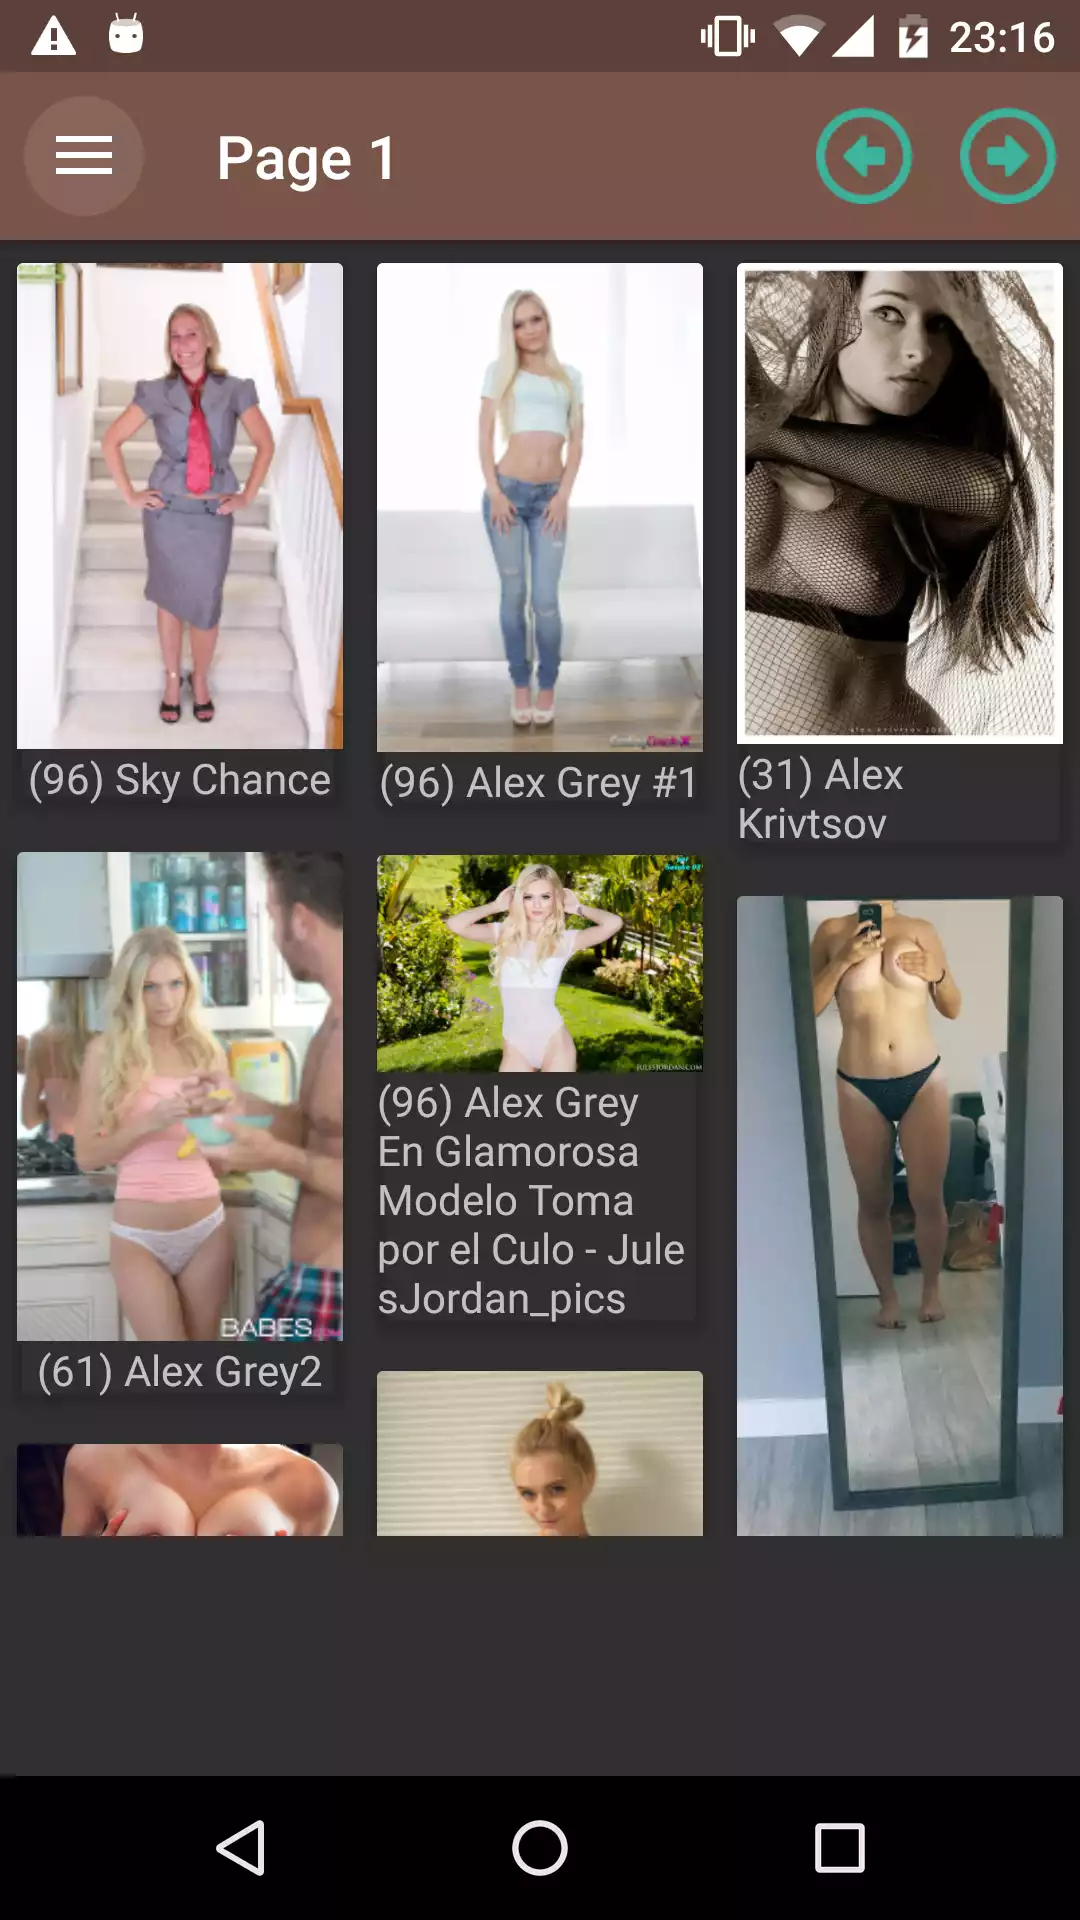 alex-chance porn,updates,pictures,collection,jagger,free,images,gallery,panties,wallpapers,josie,shemale,best,pic,hentai,image,apps,download,wallpaper,backgrounds,erotic,pack,galleries,sexy,app